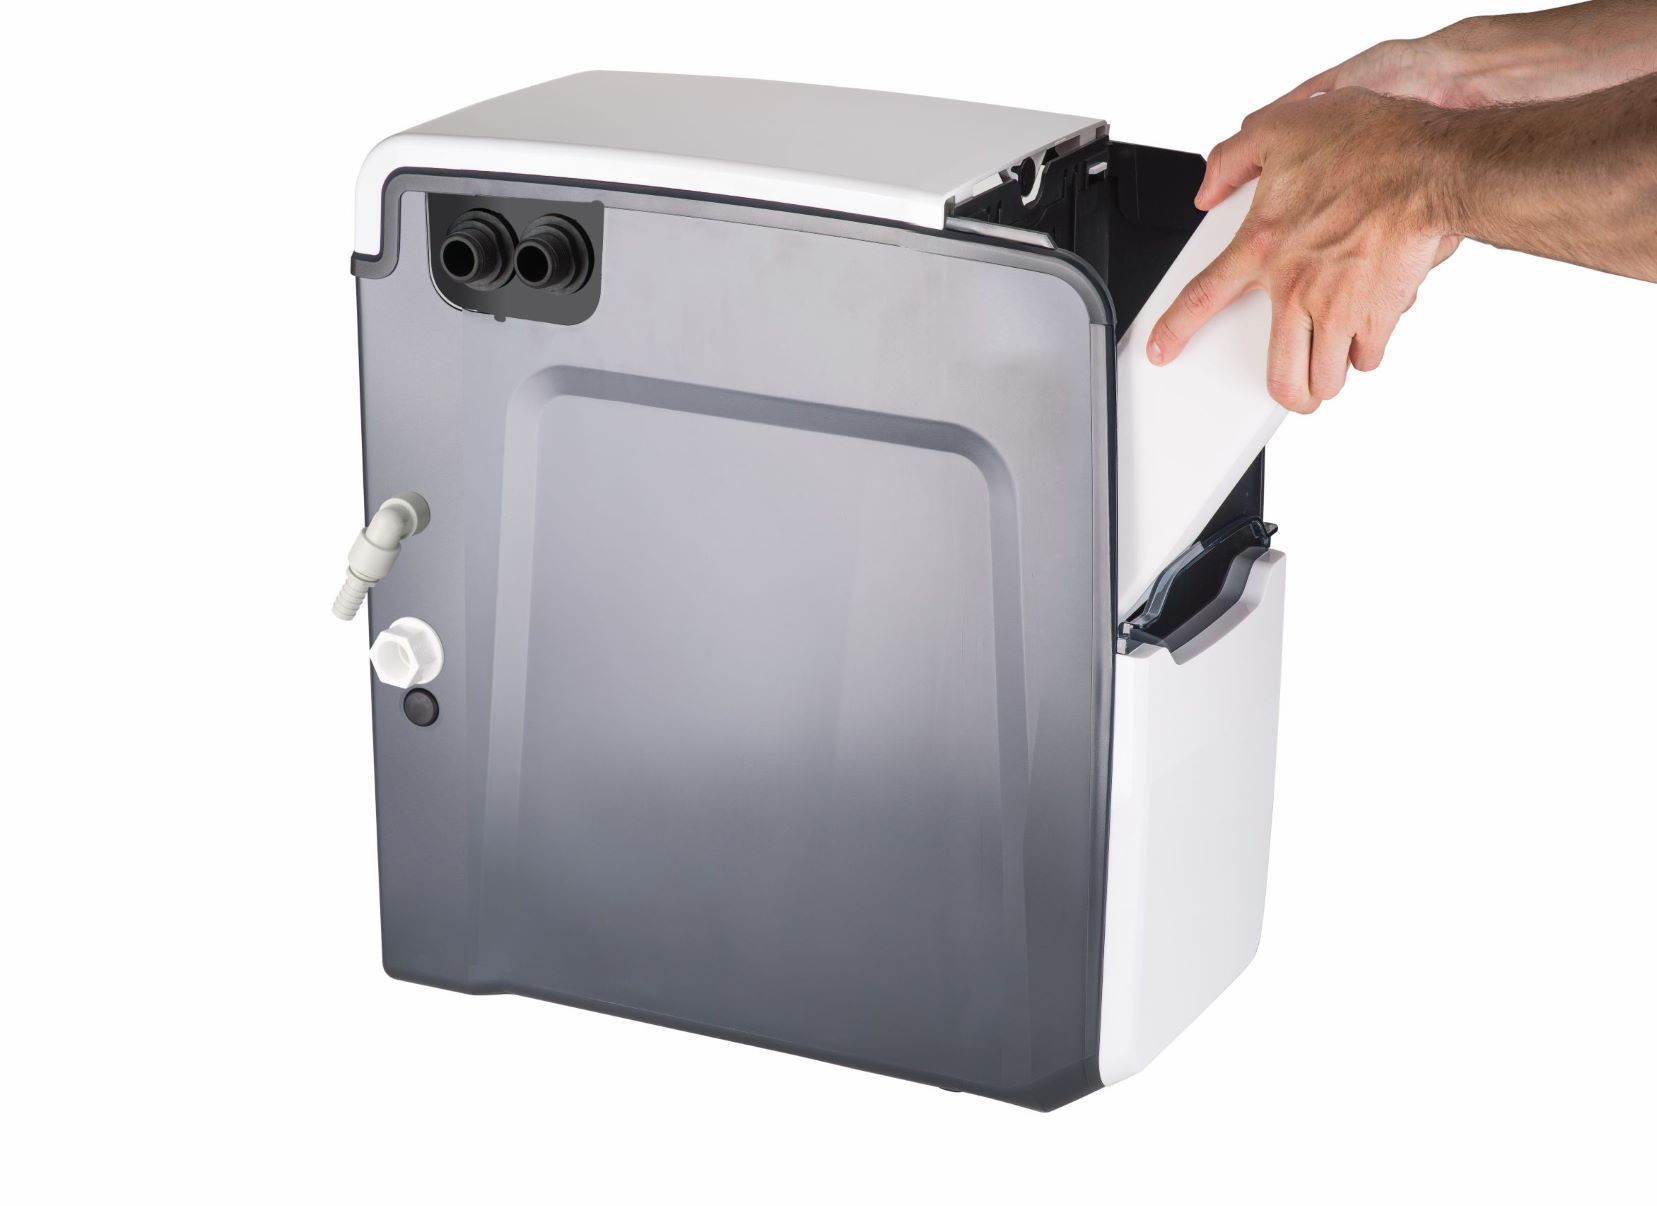 refilling an infinity t4 water softener with block salt